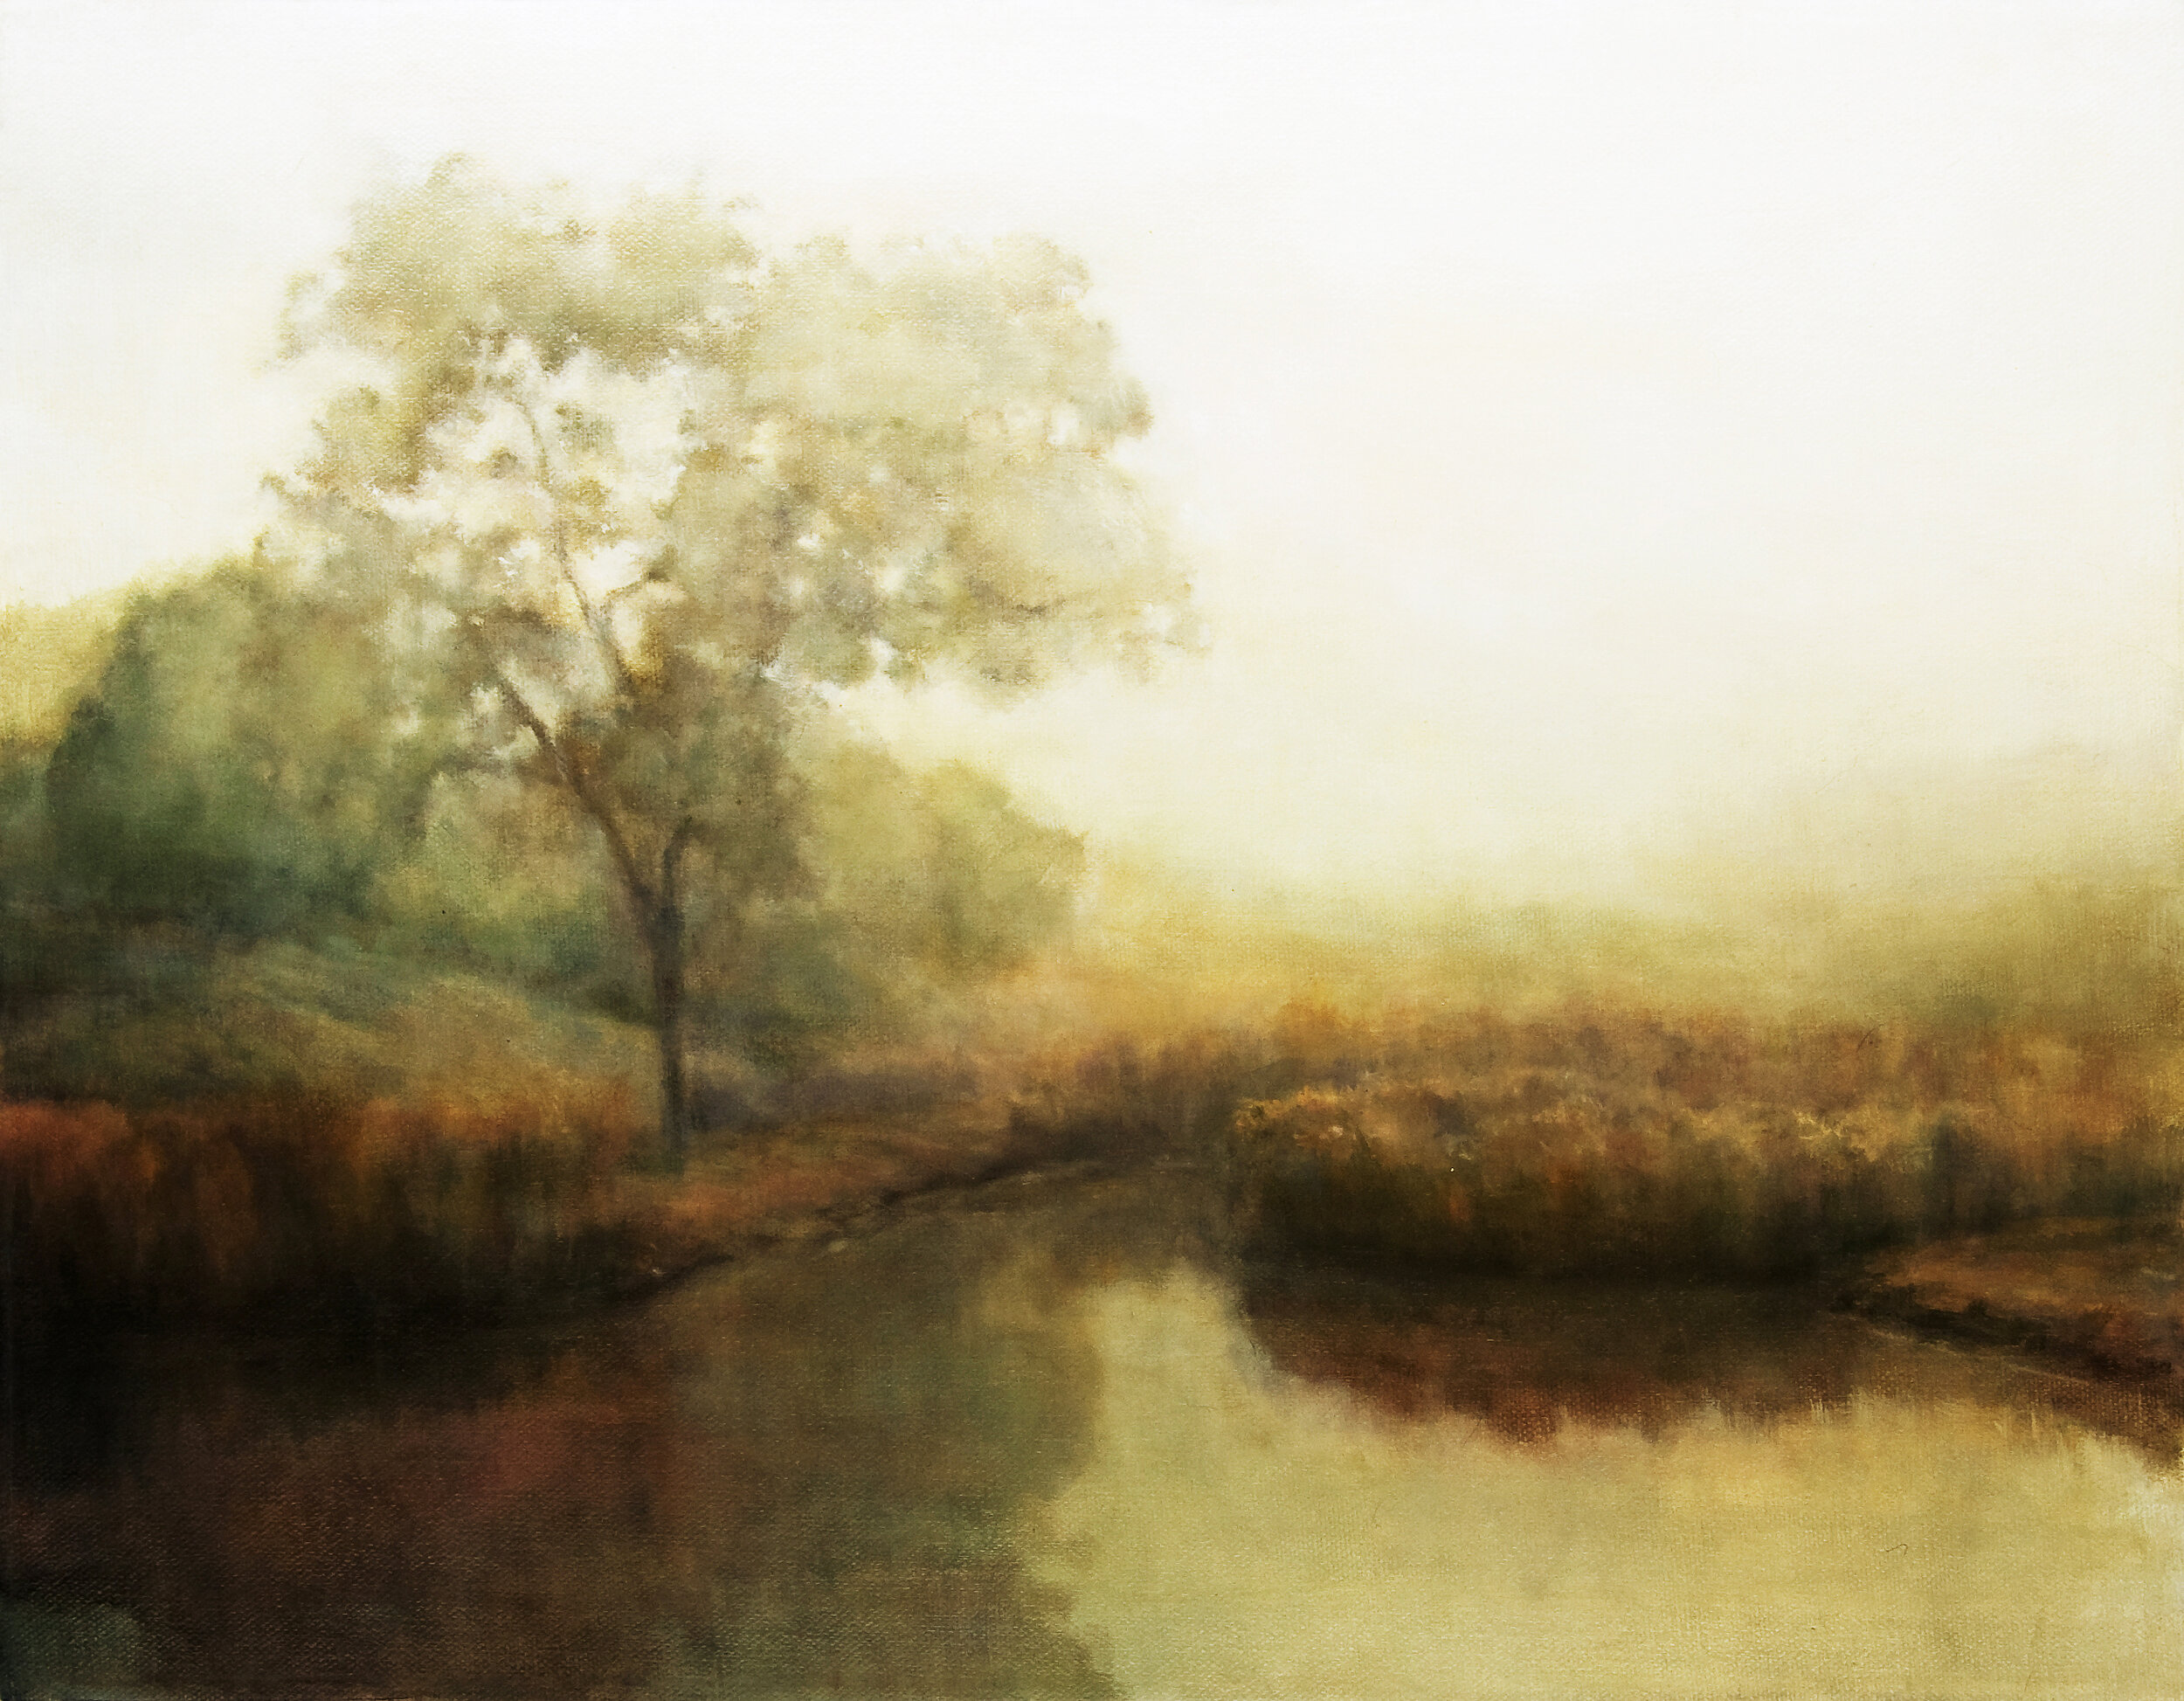  Mary Lou Schempf  Afternoon Fog,  16” x 20”, oil on canvas  (private collection)  